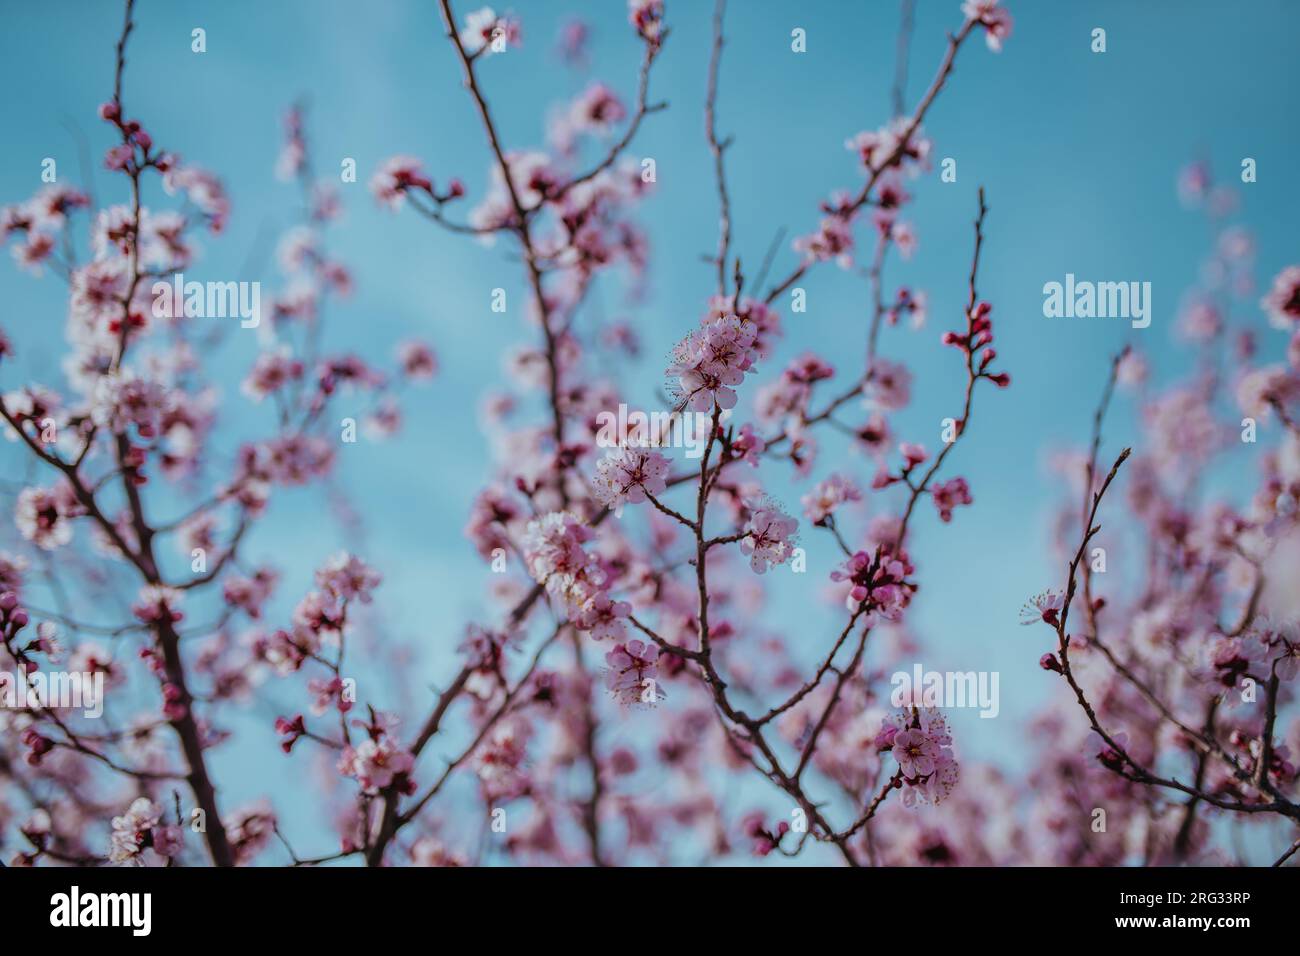 Branches of blossoming apricot tree on sky background Stock Photo